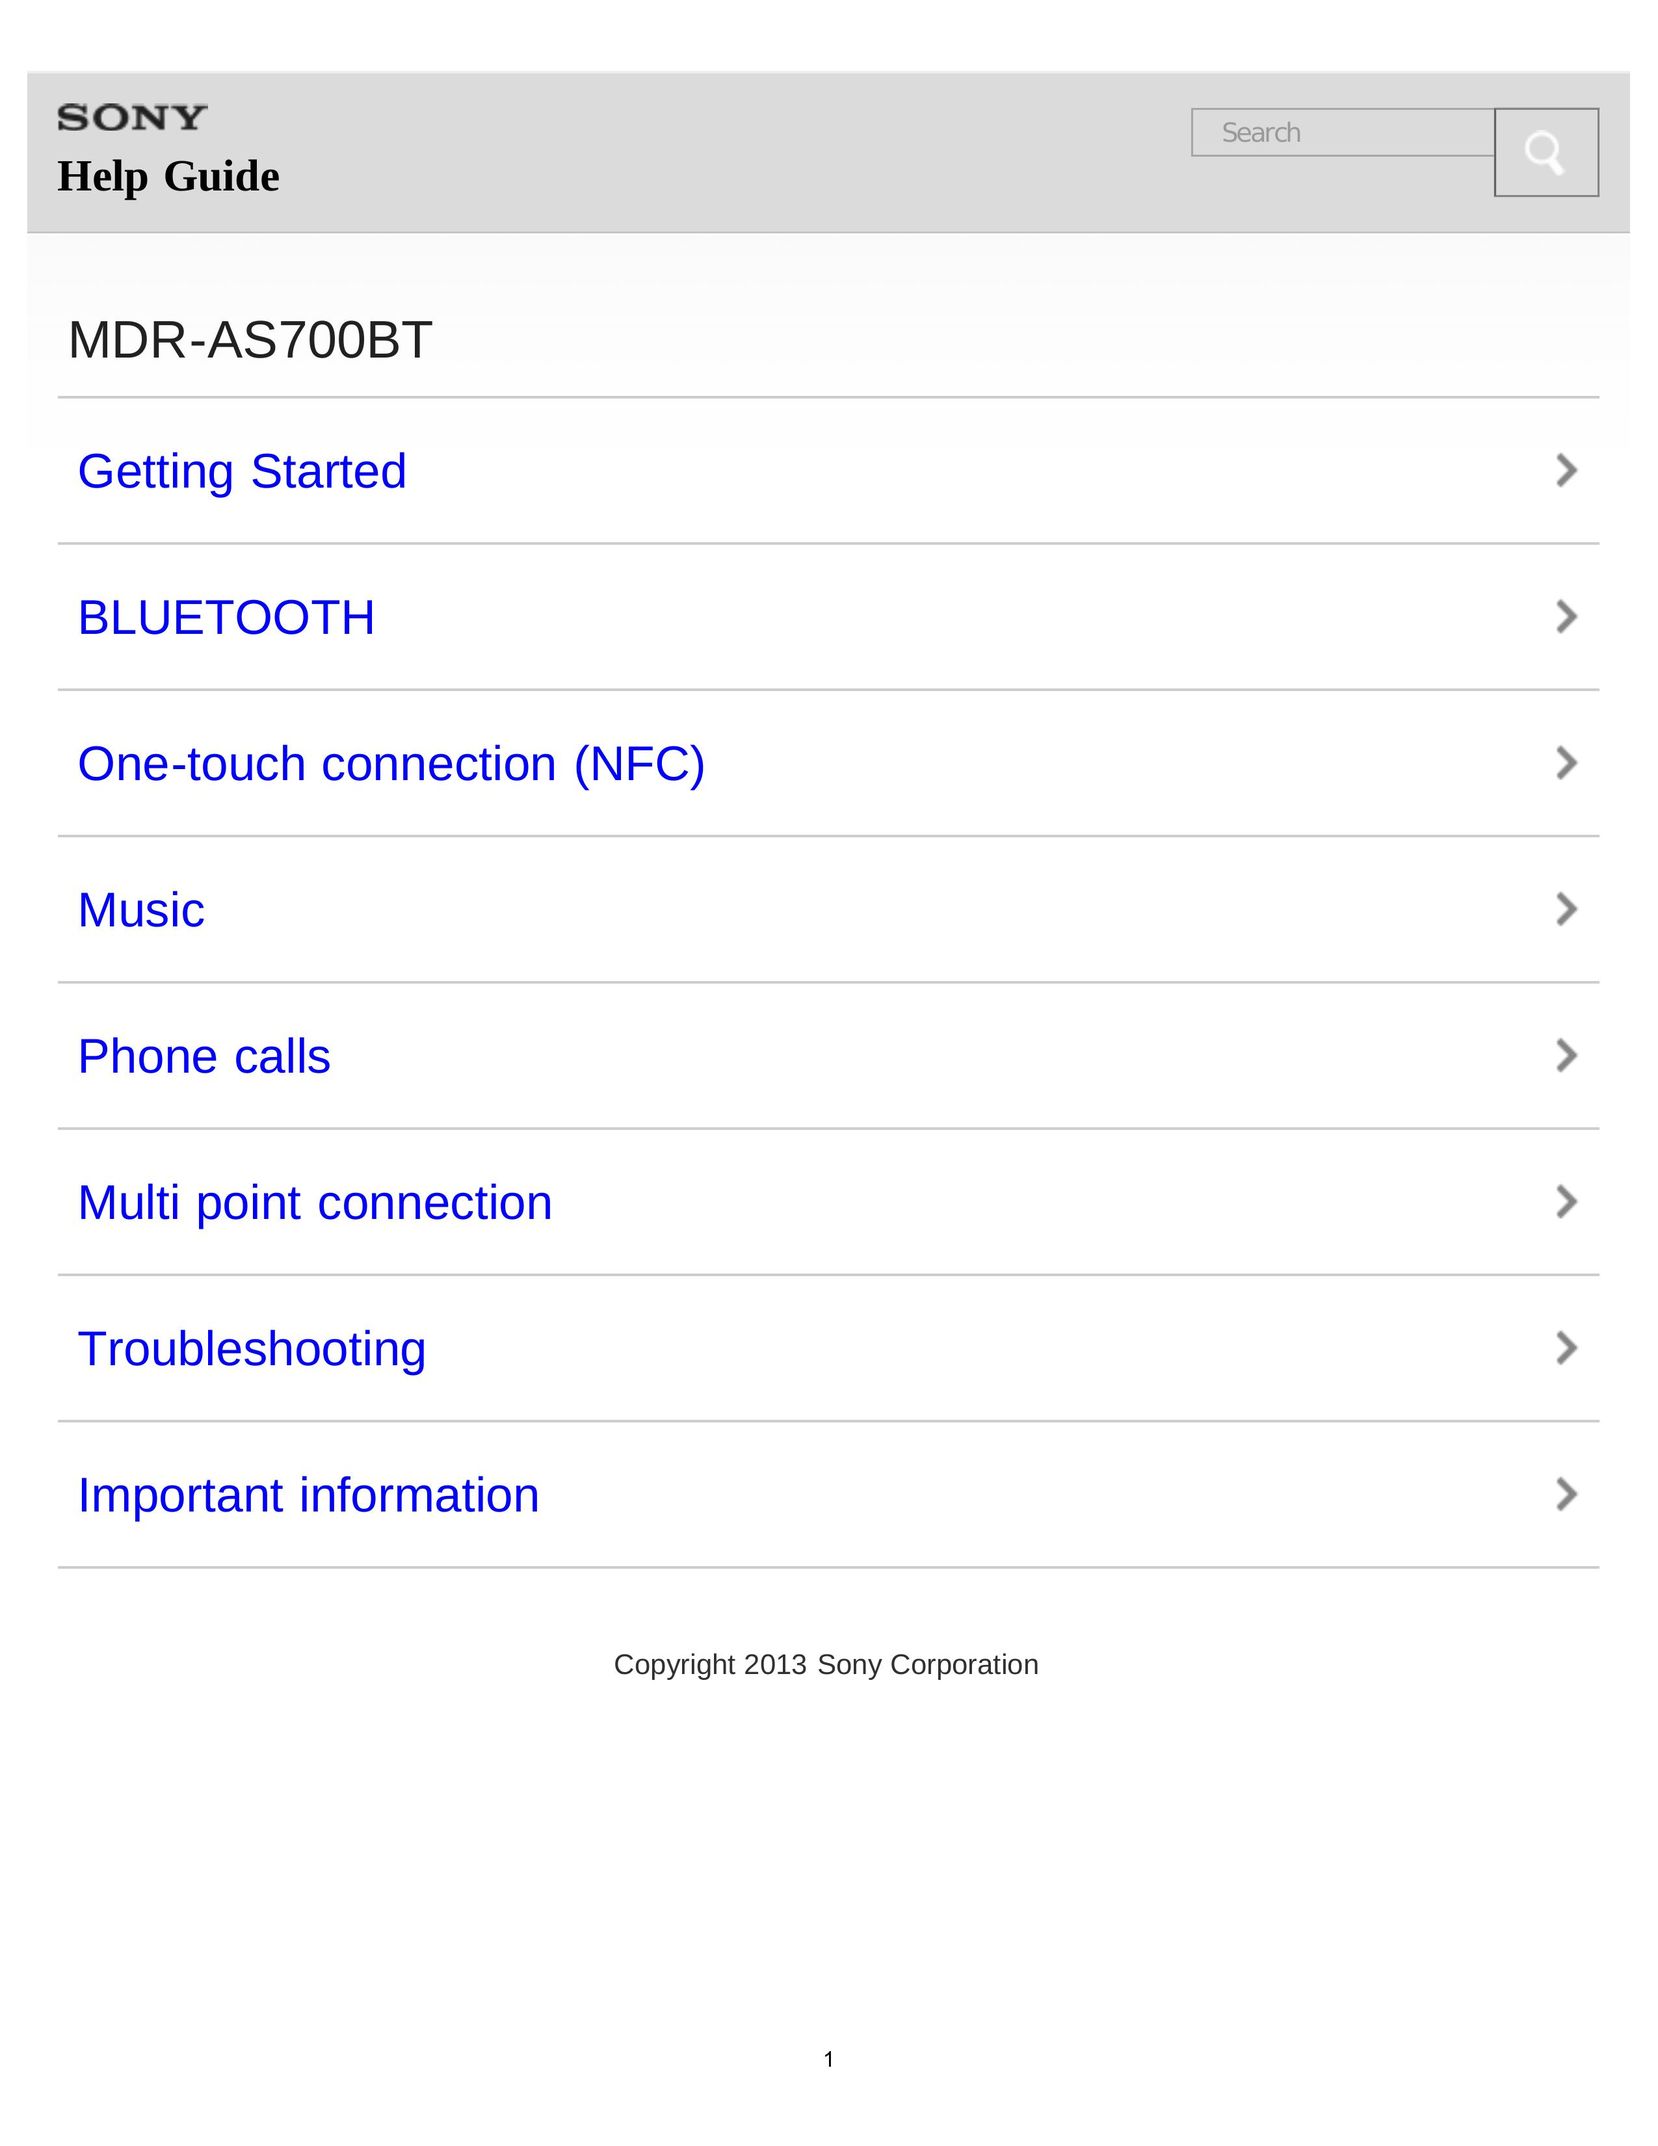 Sony MDR-AS700BT Bluetooth Headset User Manual